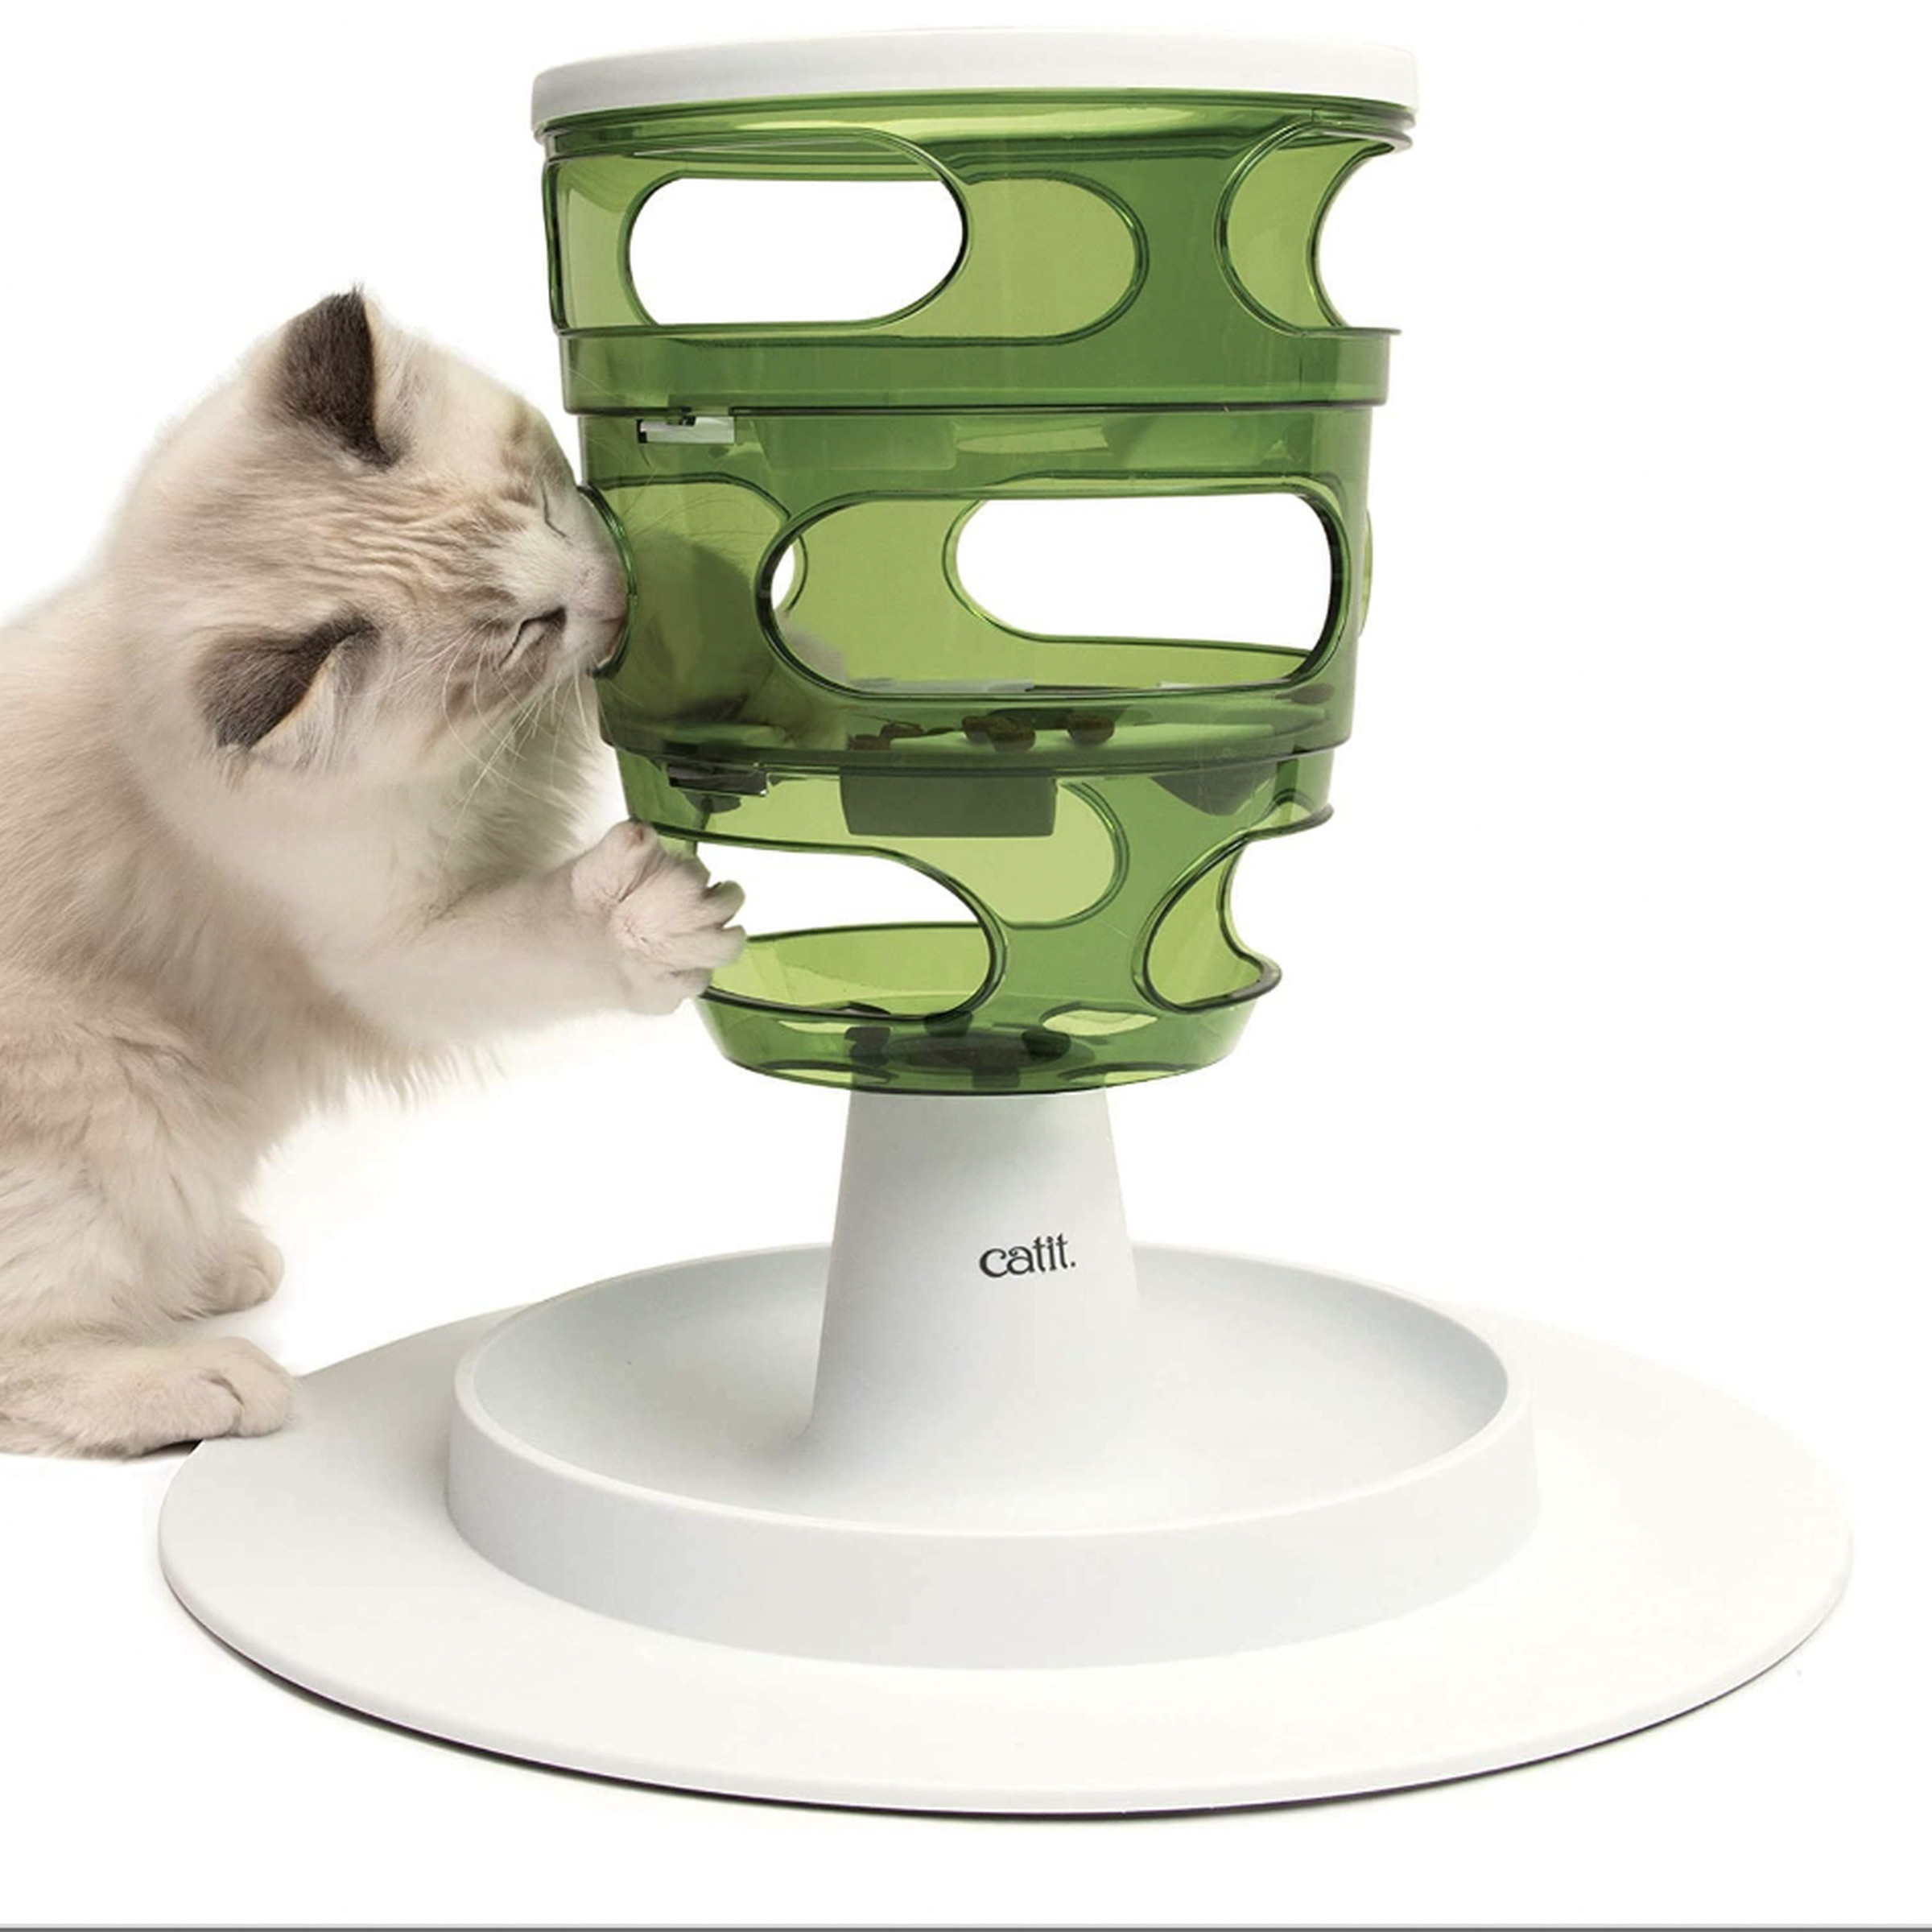 A cat tries to get into a tall plastic tower with openings for food.